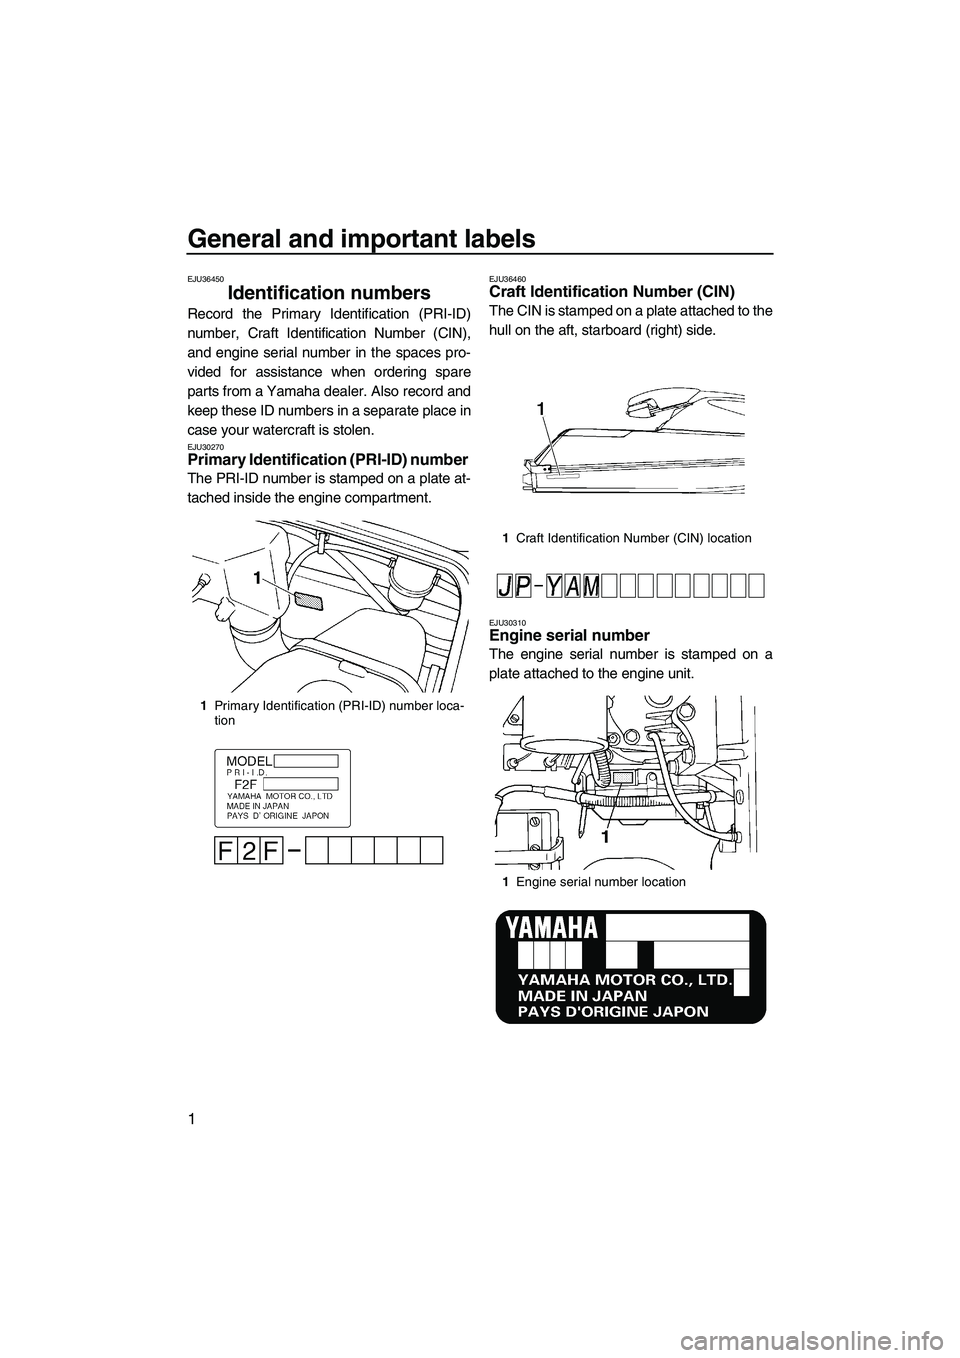 YAMAHA SUPERJET 2009  Owners Manual General and important labels
1
EJU36450
Identification numbers 
Record the Primary Identification (PRI-ID)
number, Craft Identification Number (CIN),
and engine serial number in the spaces pro-
vided 